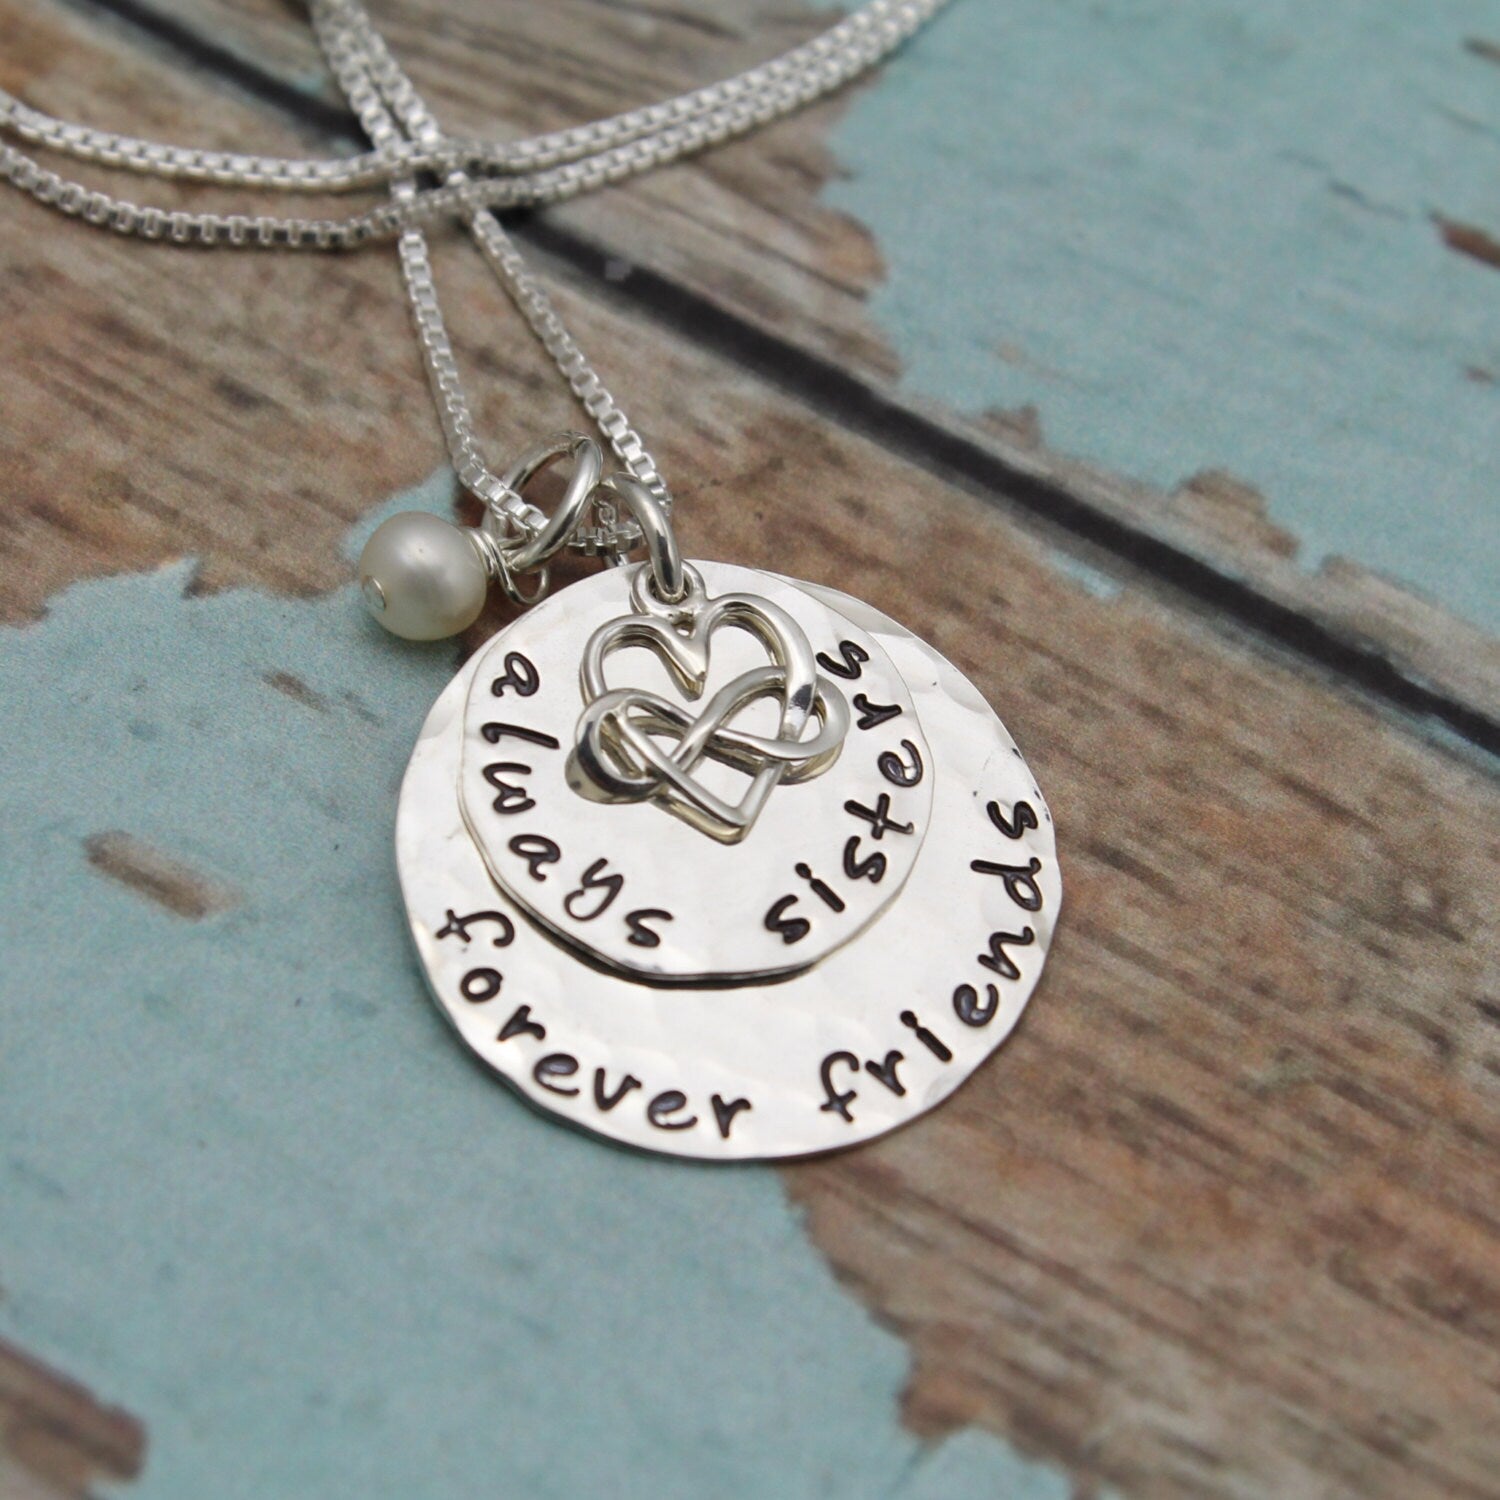 Sisters Necklace, Sister Necklace, Always Sisters, Forever Friends, Sisters Gift, Hand Stamped Sister's Jewelry, Sisters Jewelry